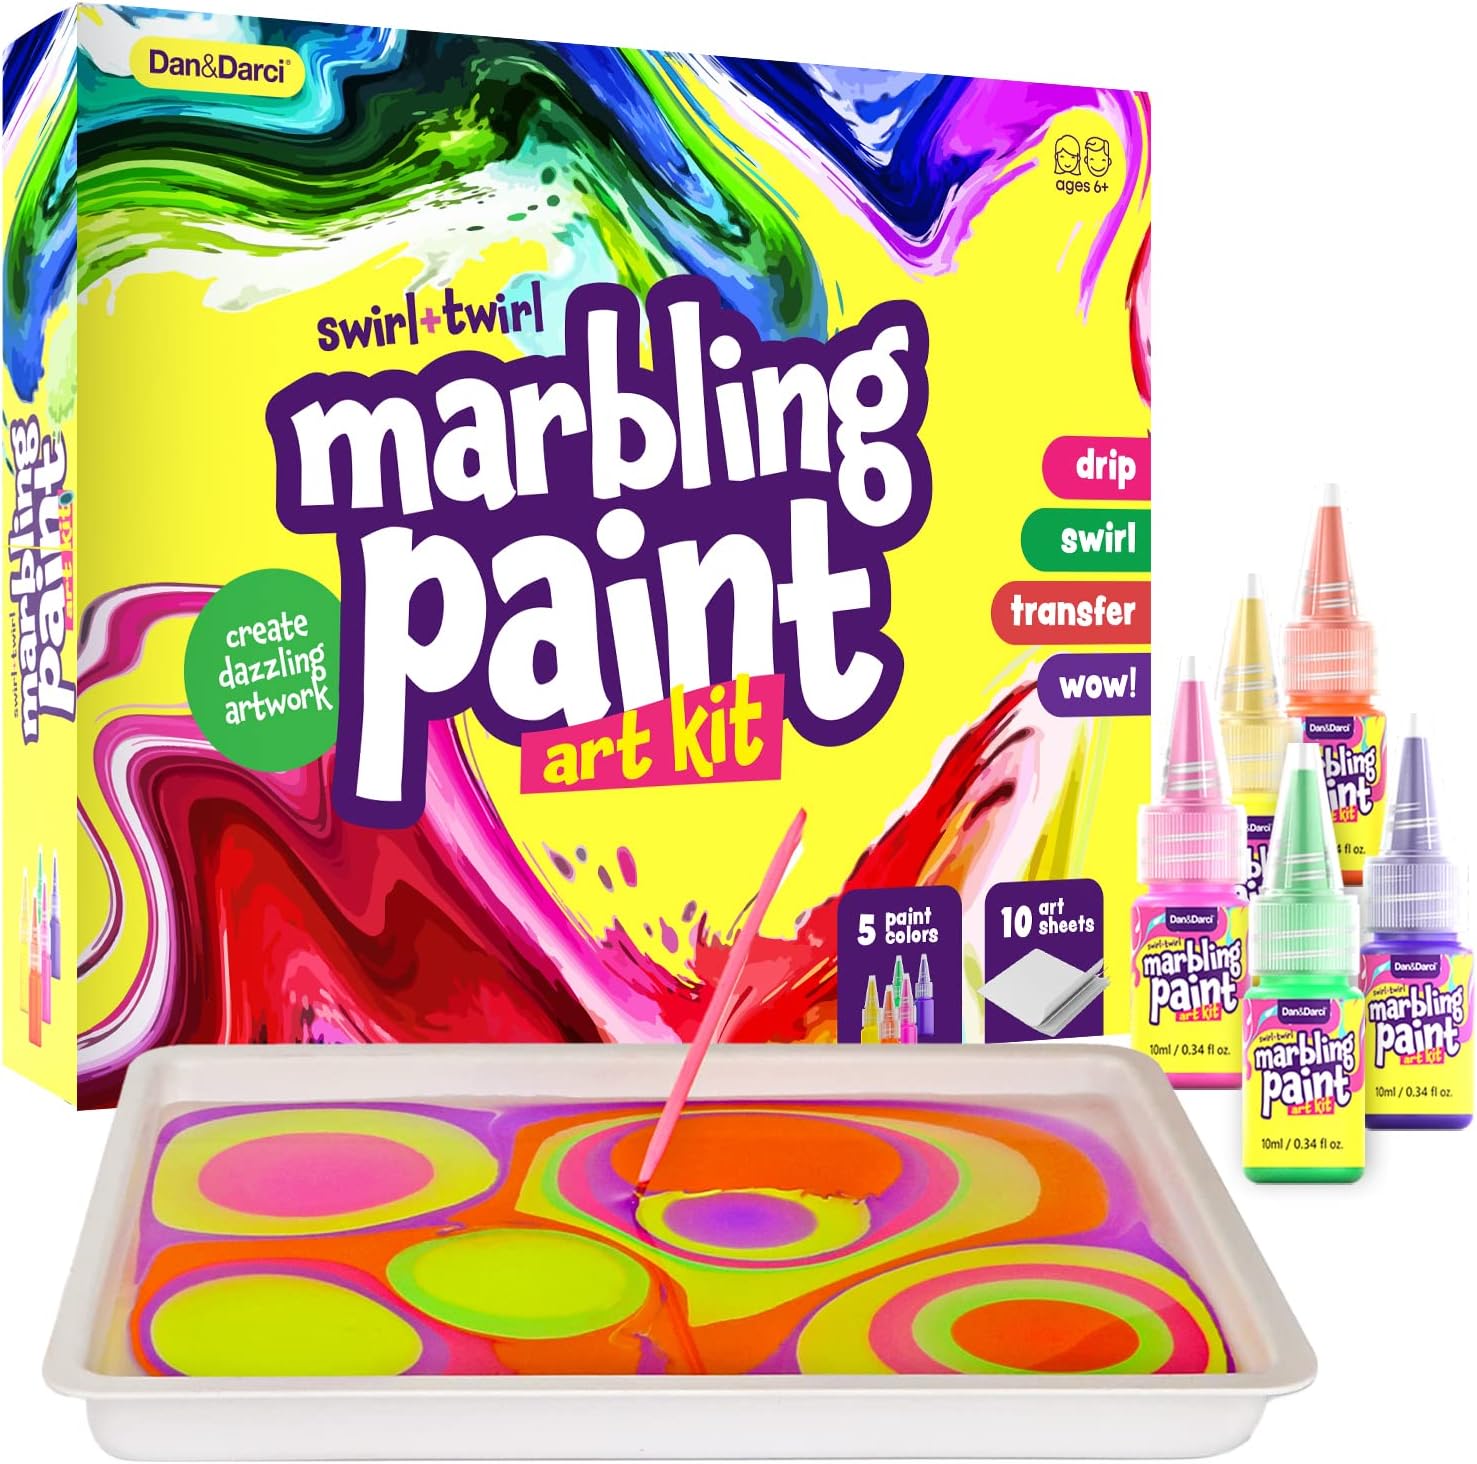 Marbling Paint Art Kit for Kids - Arts and Crafts Gifts for Girls & Boys Ages 6-12 Years Old - Craft Kits Set - Best Paint Gift Ideas Activities Toys Age 5 6 7 8 9 10 Year Olds - Marble Painting Kits